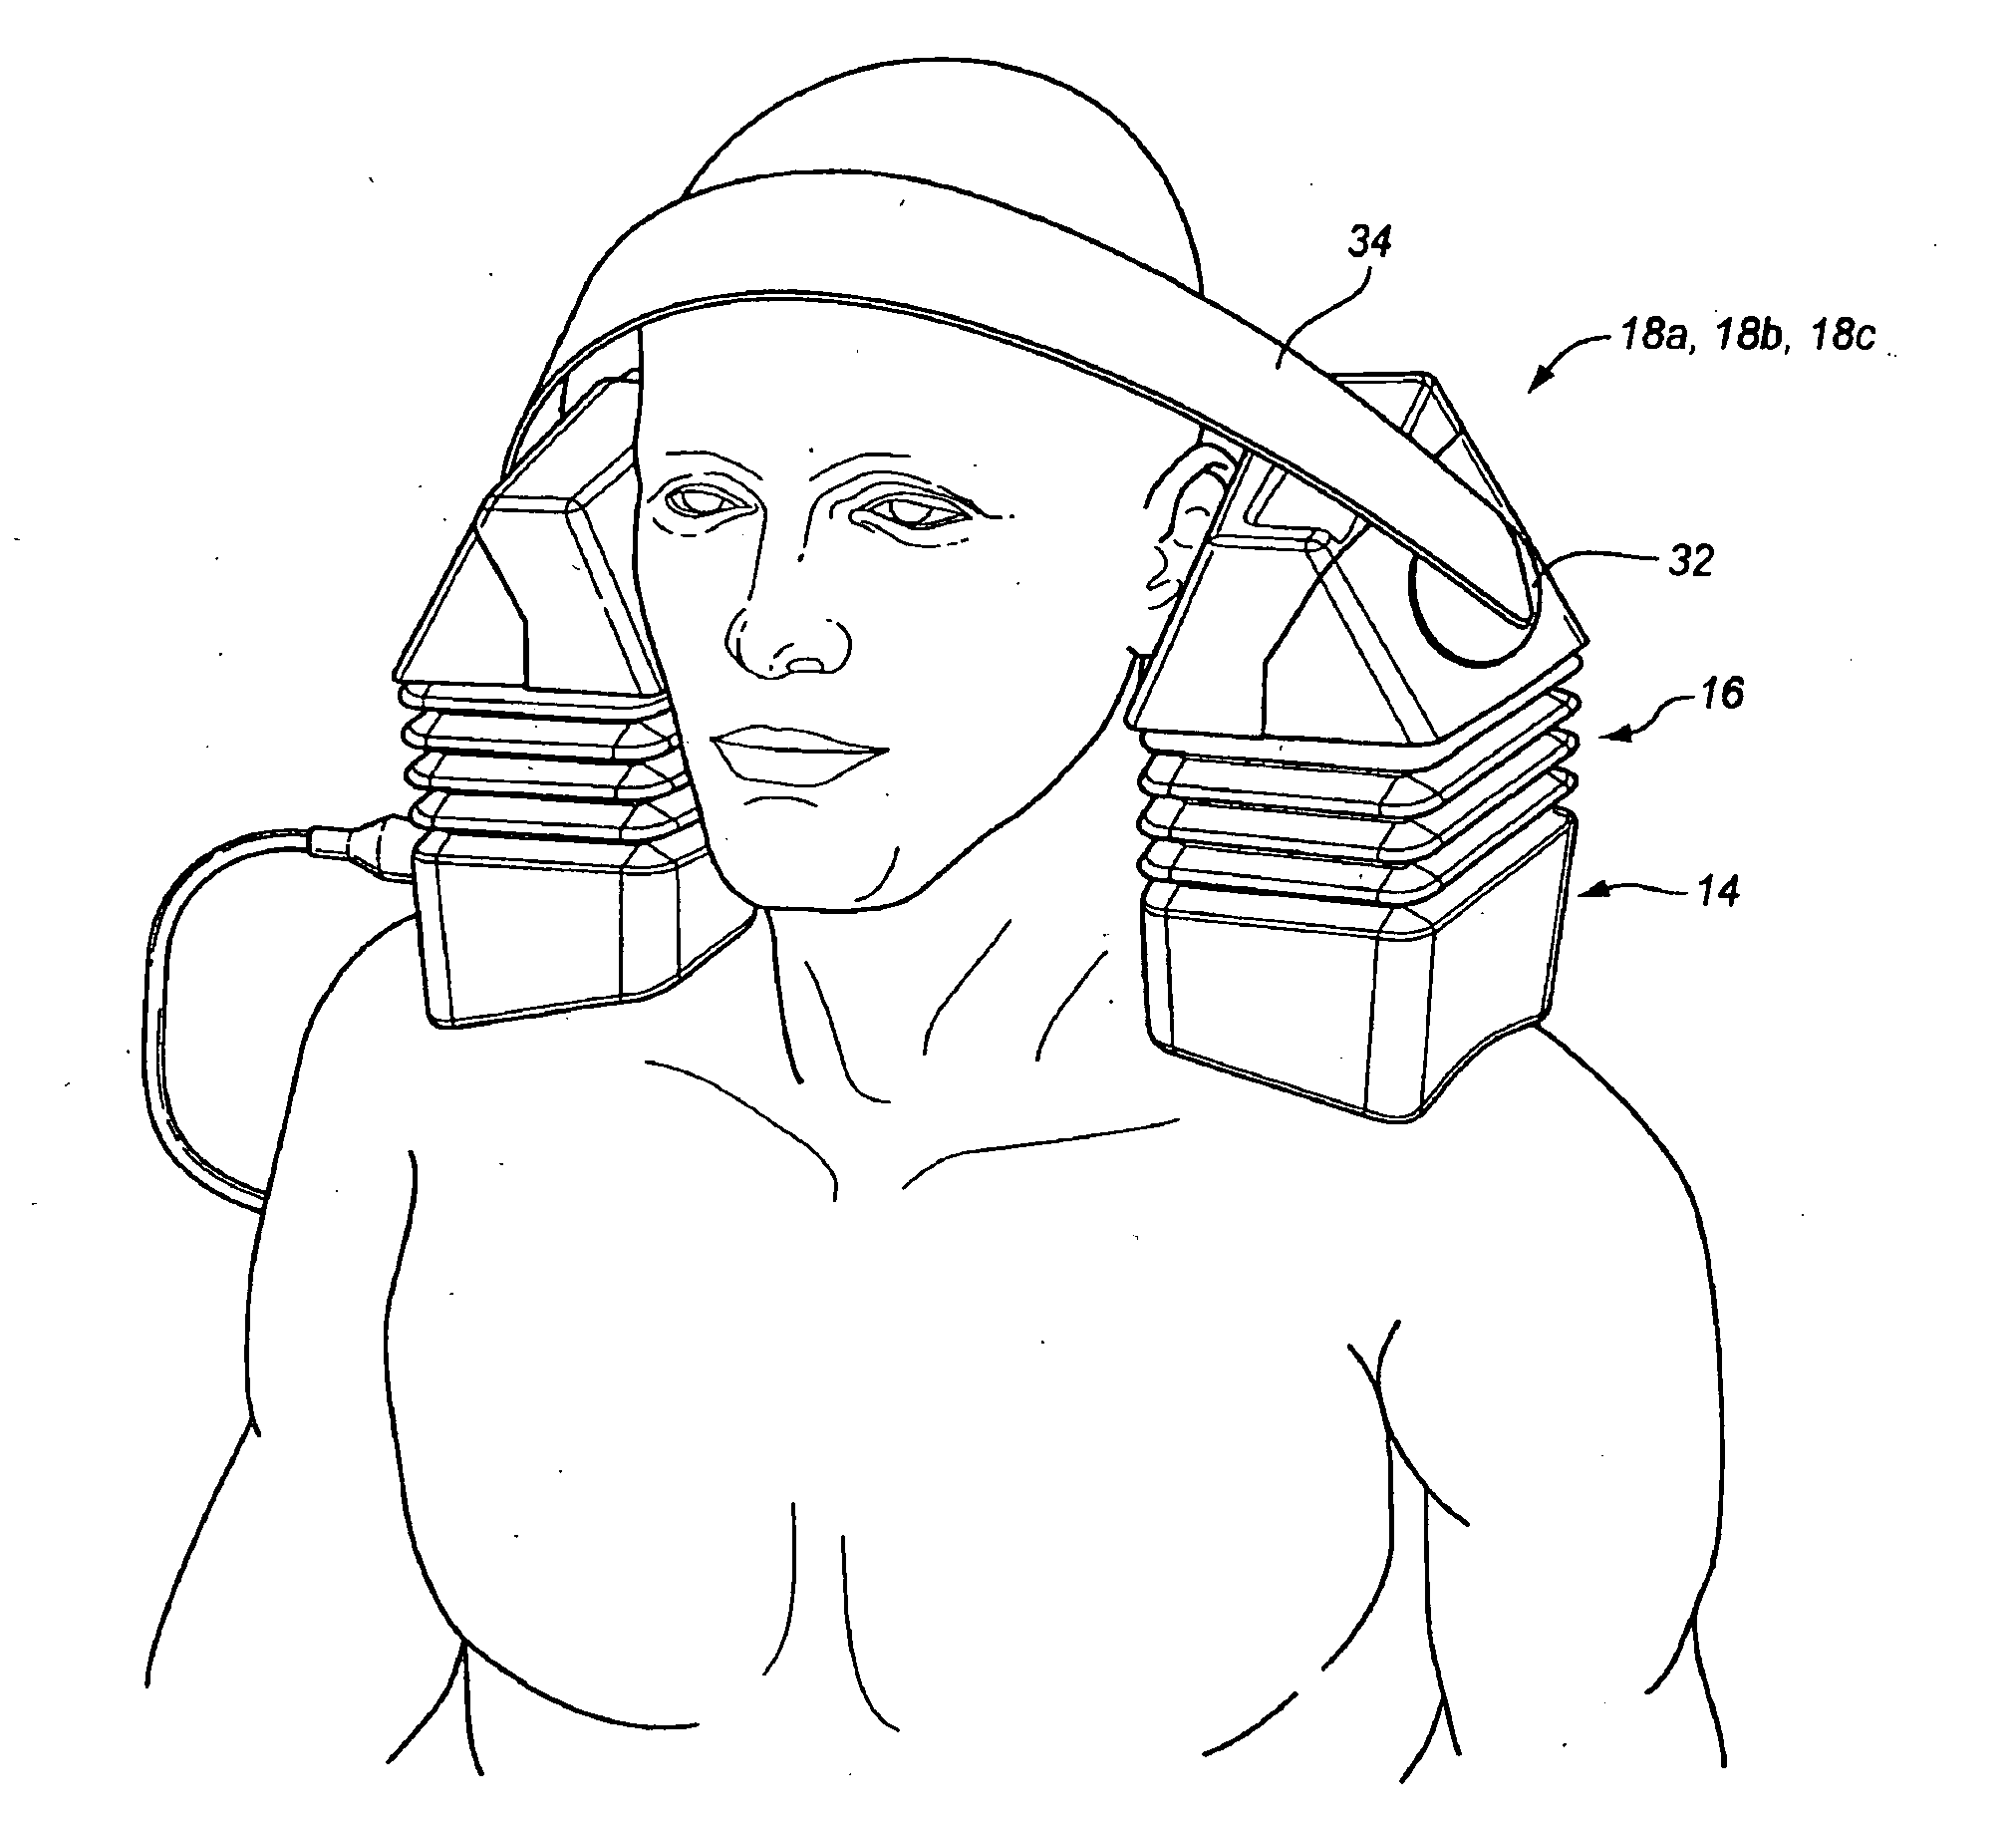 Cervical traction/stretch device and method for its use